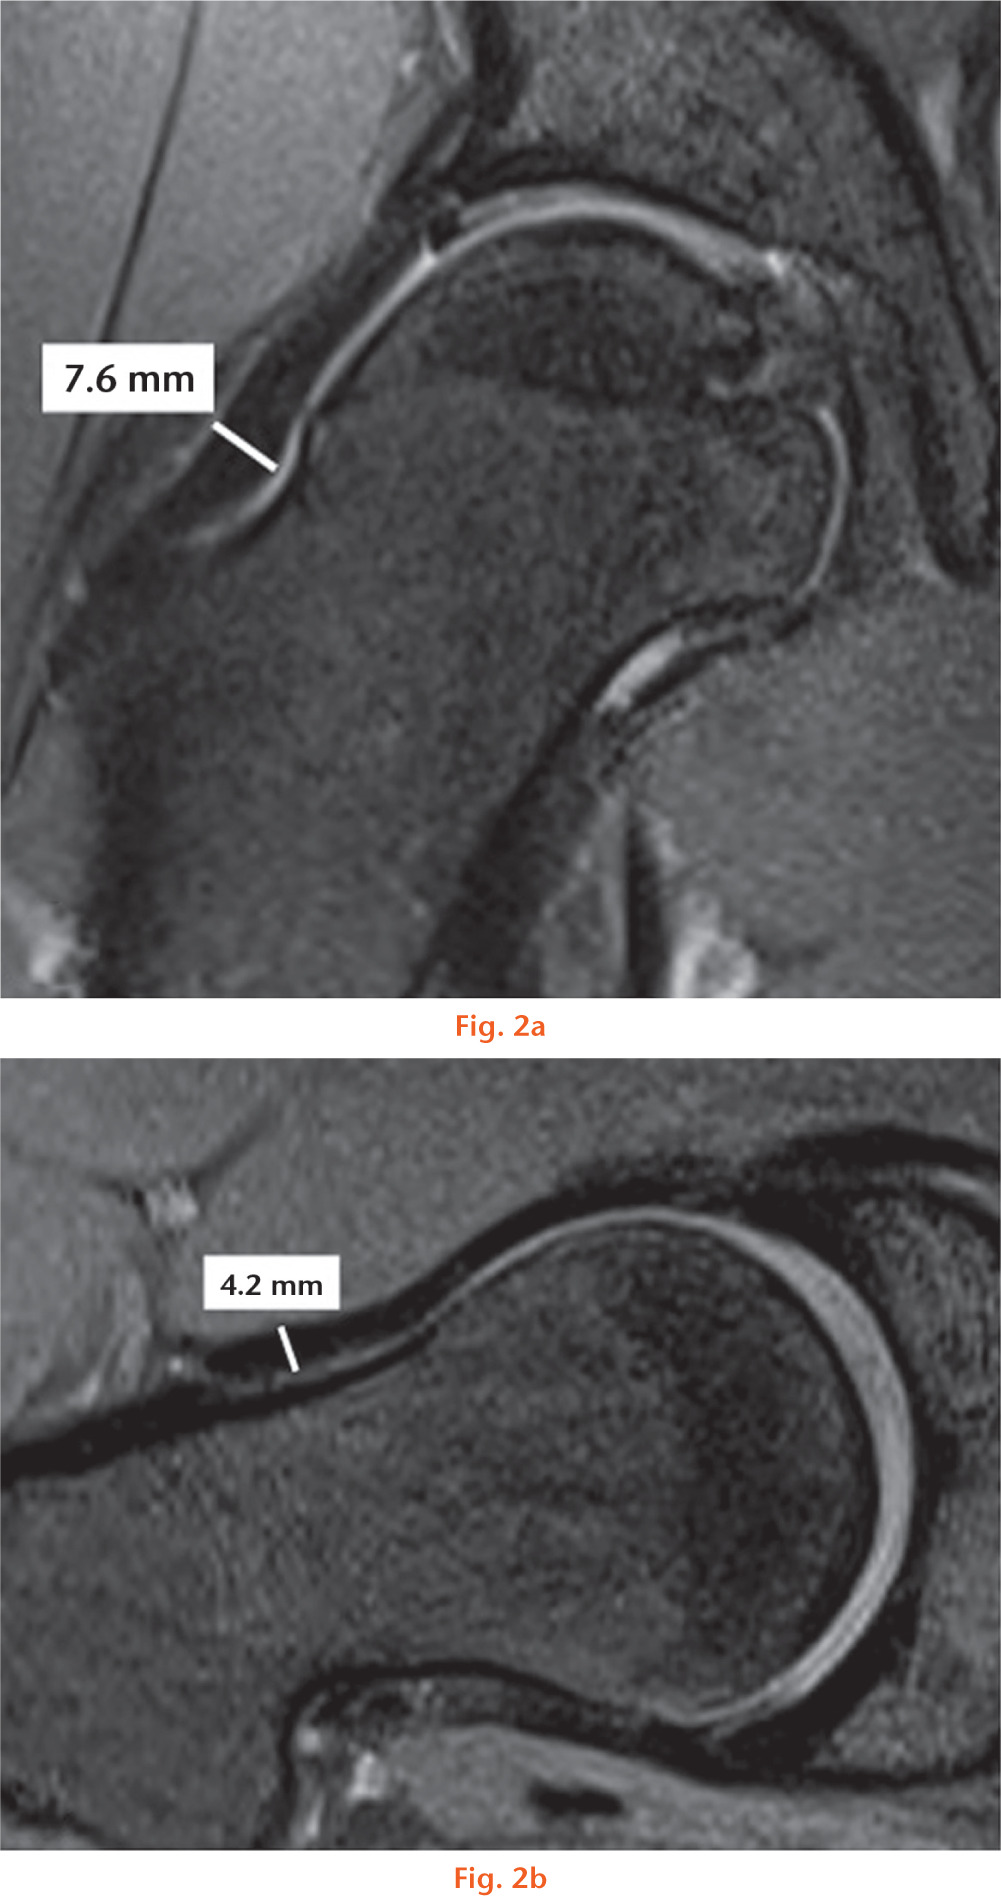  
          Measurement of the (a) superior (12:00) capsule thickness on an oblique coronal MRI image of a cam-FAI subject and (b) anterior (3:00) capsule thickness on an oblique axial MRI image of a cam-FAI subject.
        